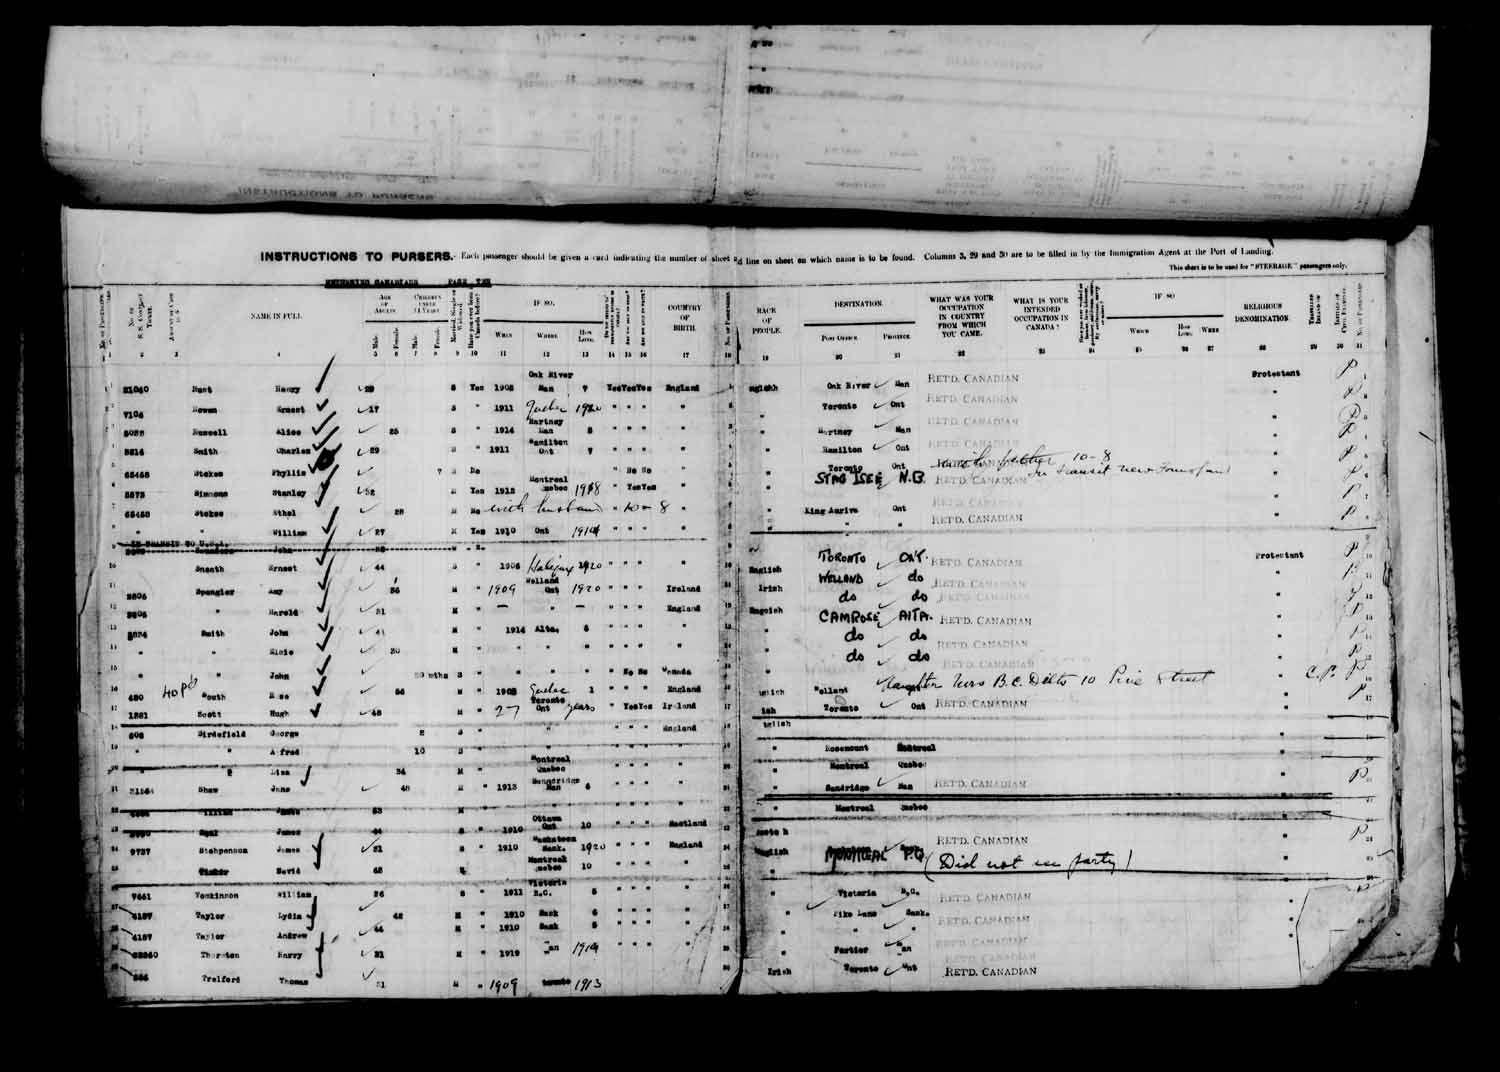 Digitized page of Passenger Lists for Image No.: e003610637